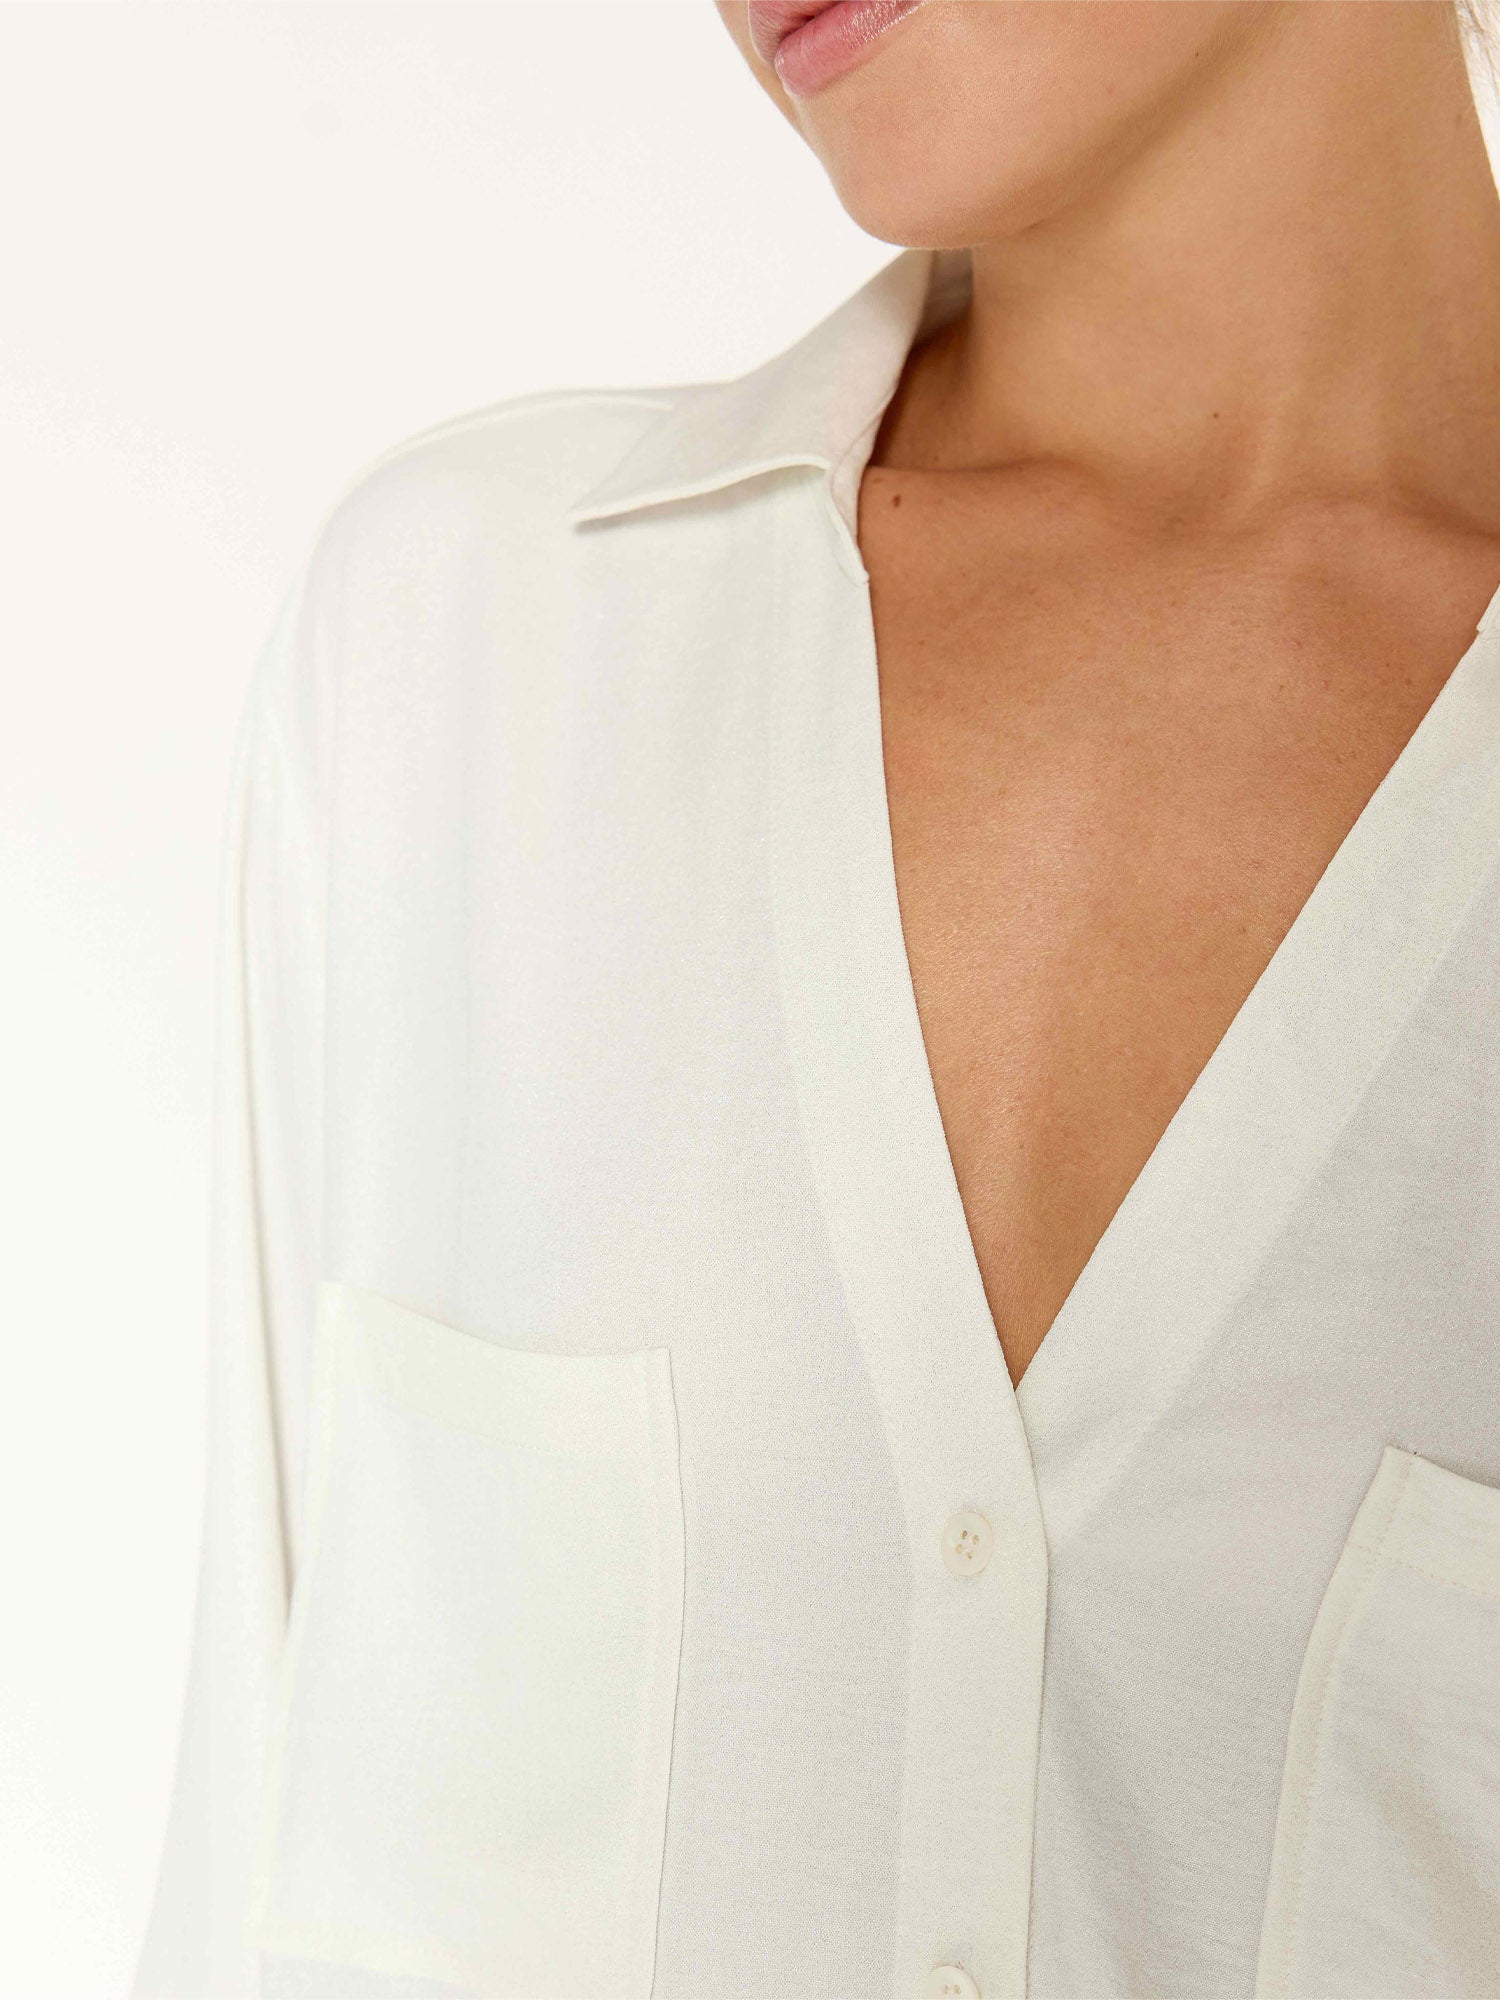 River button up white shirt close up